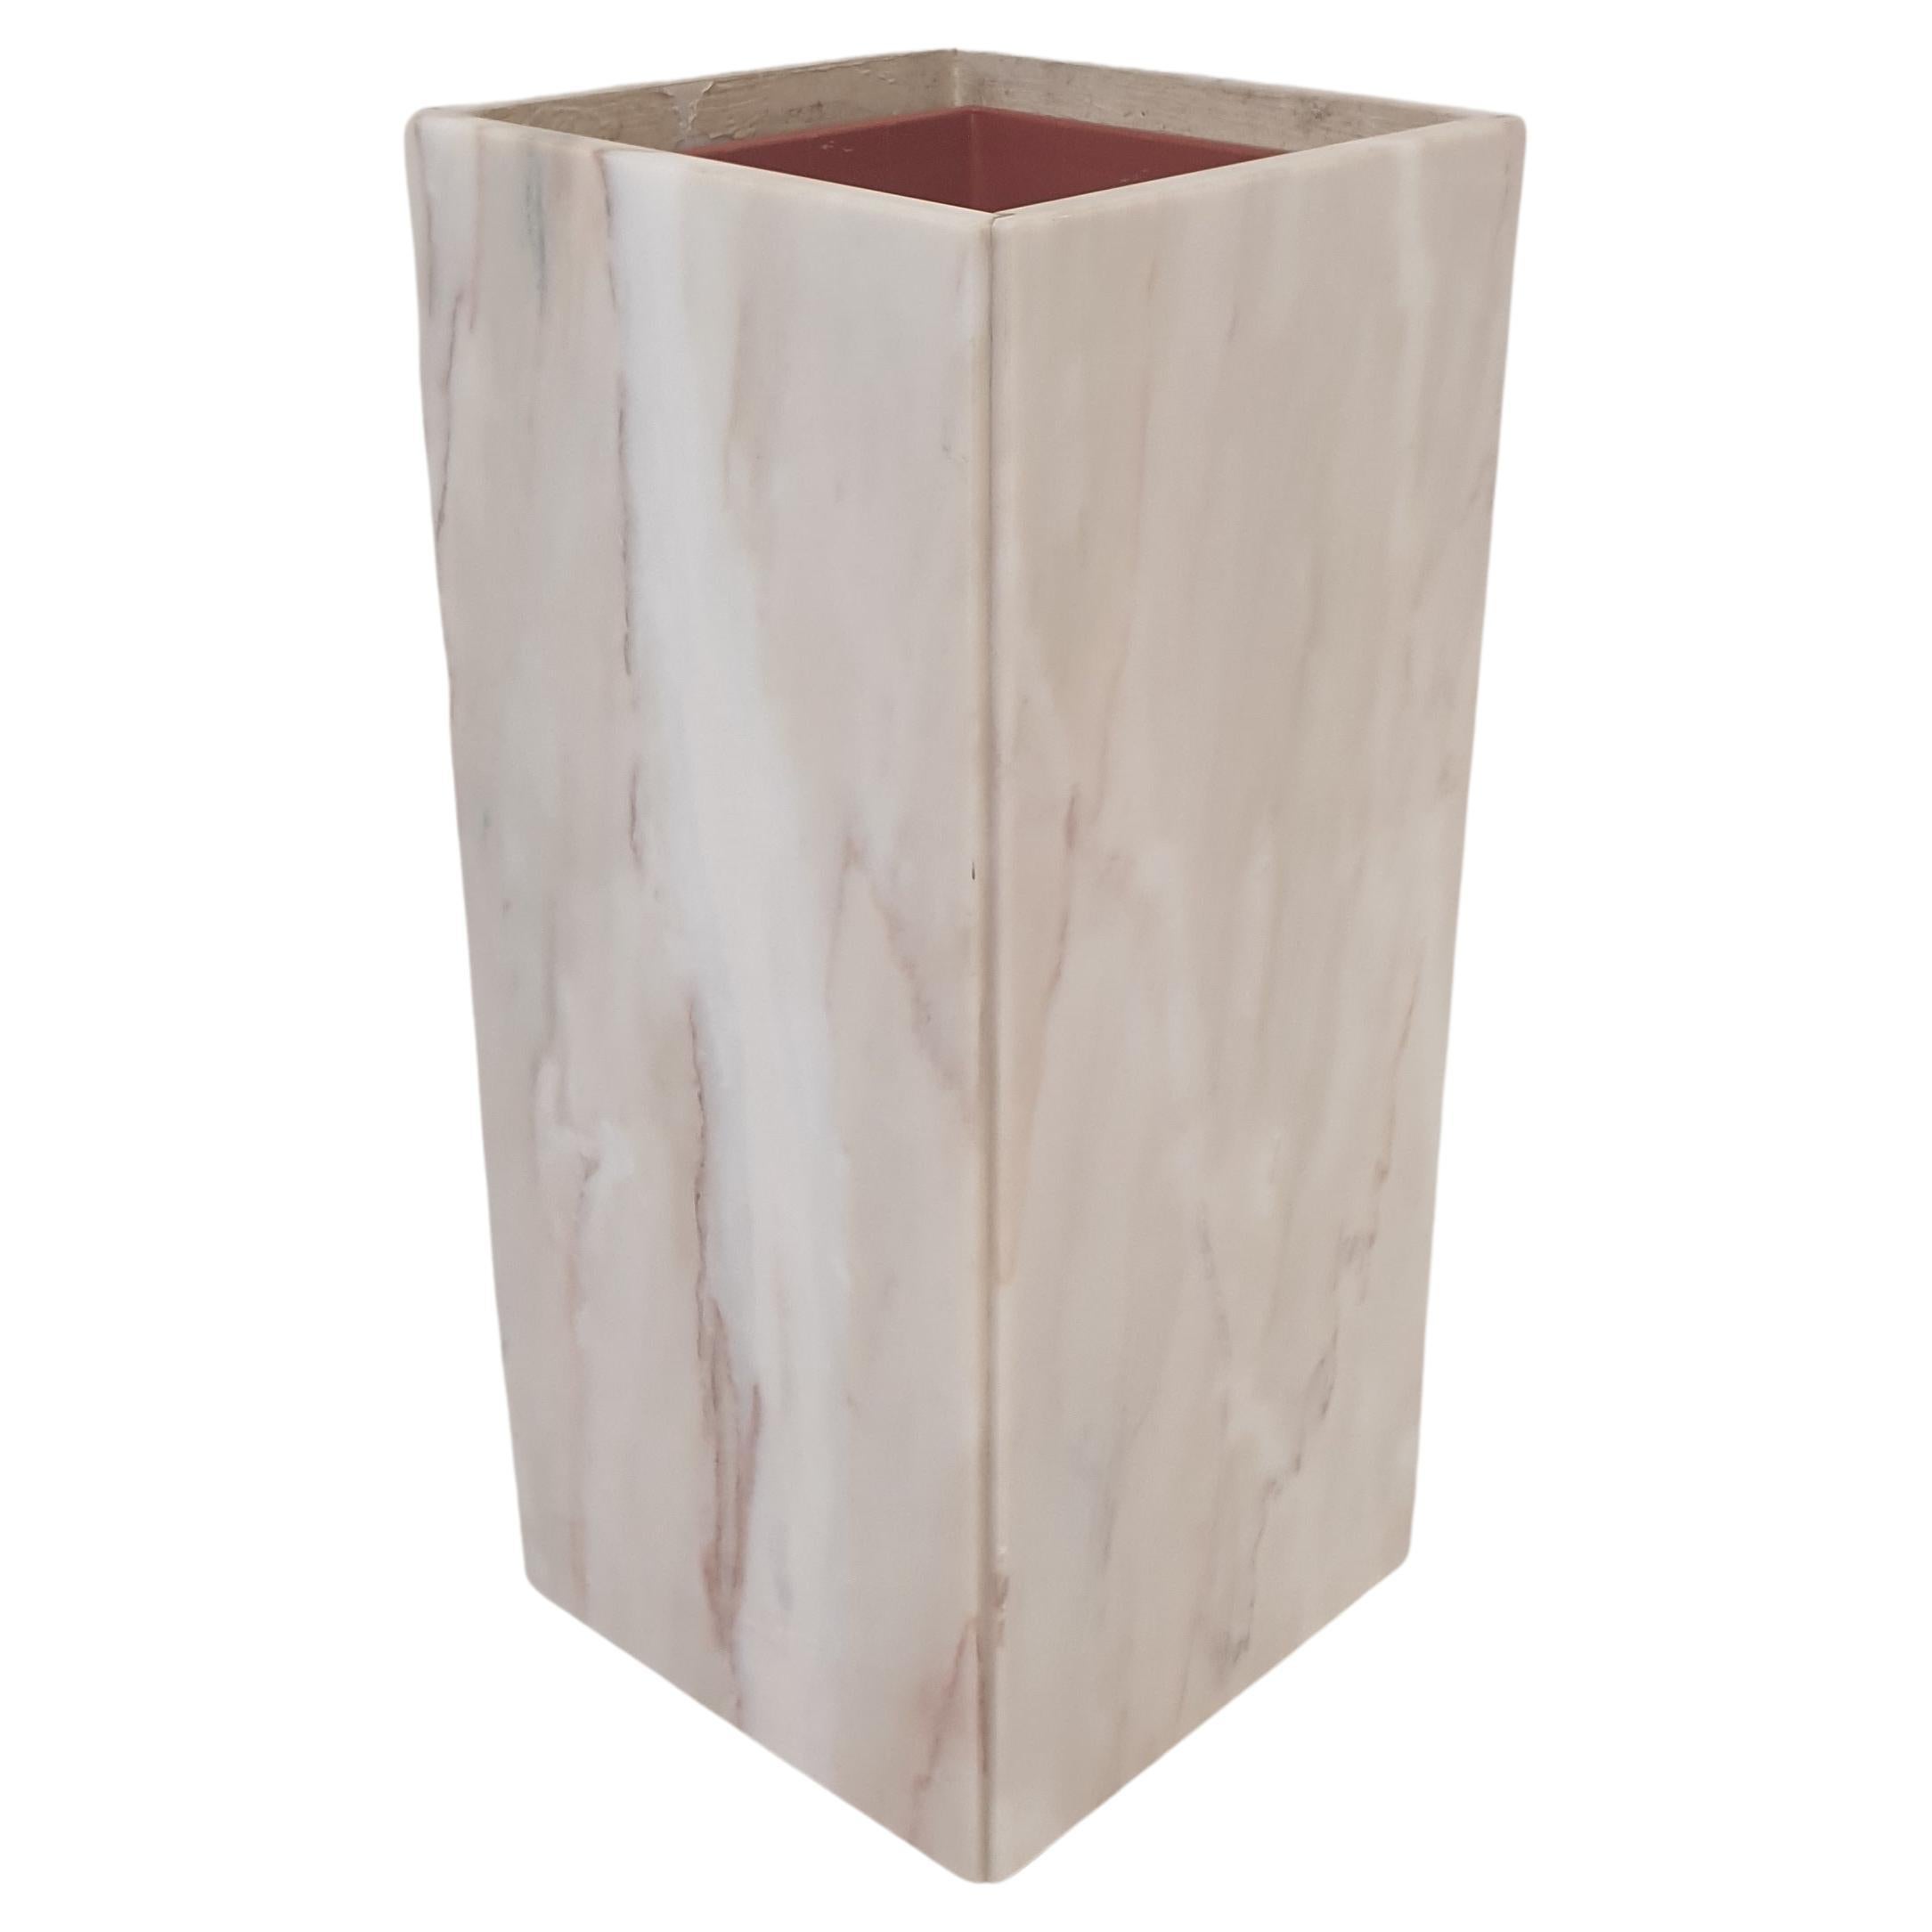 Italian Marble Planter or Pedestal with Light, 1970's For Sale